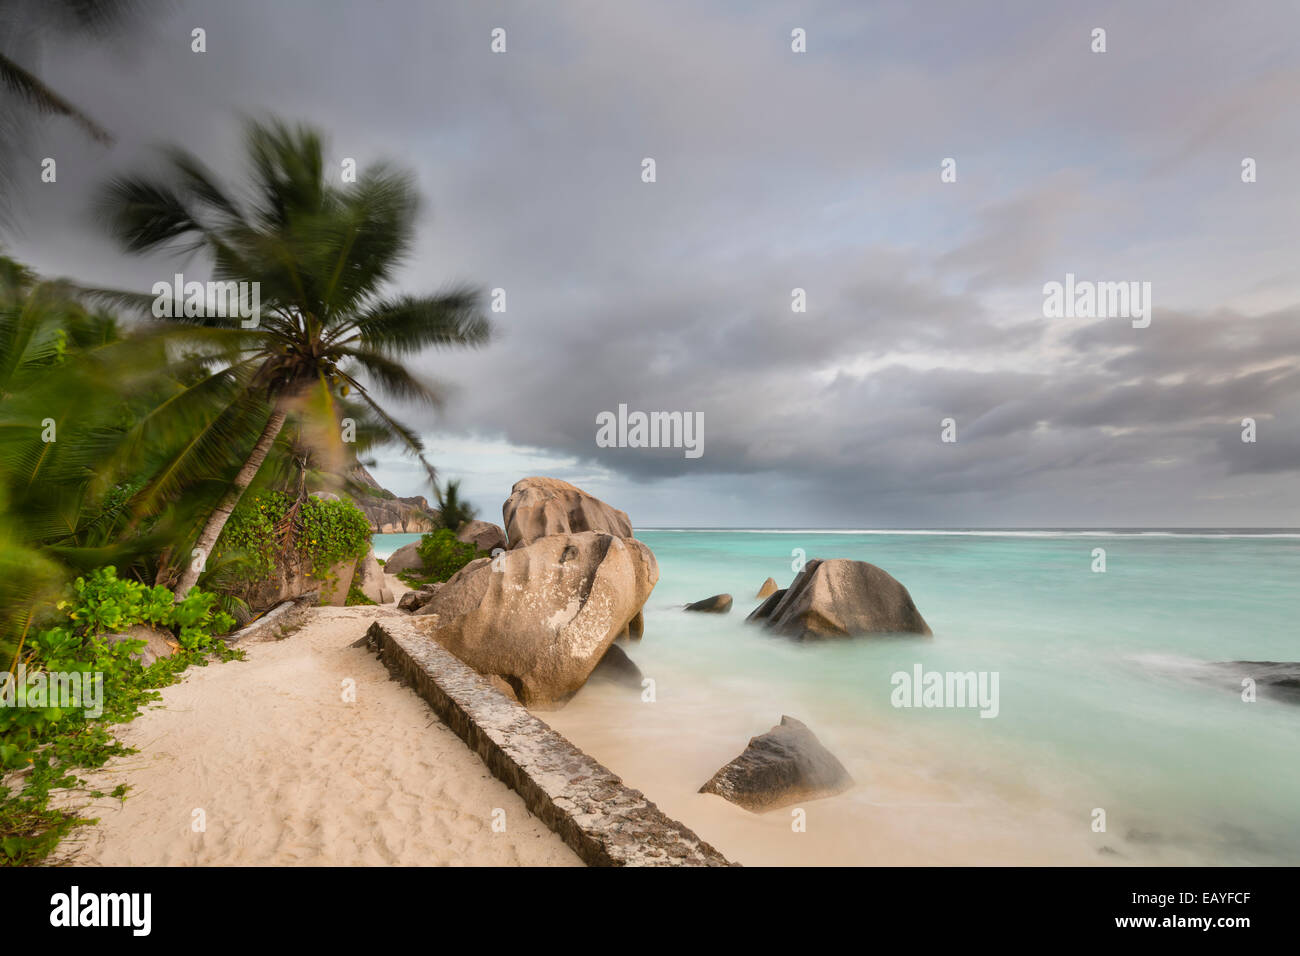 Dark clouds over the beach Anse Source D'Argent in La Digue, Seychelles with scenic granite rocks and palm trees Stock Photo